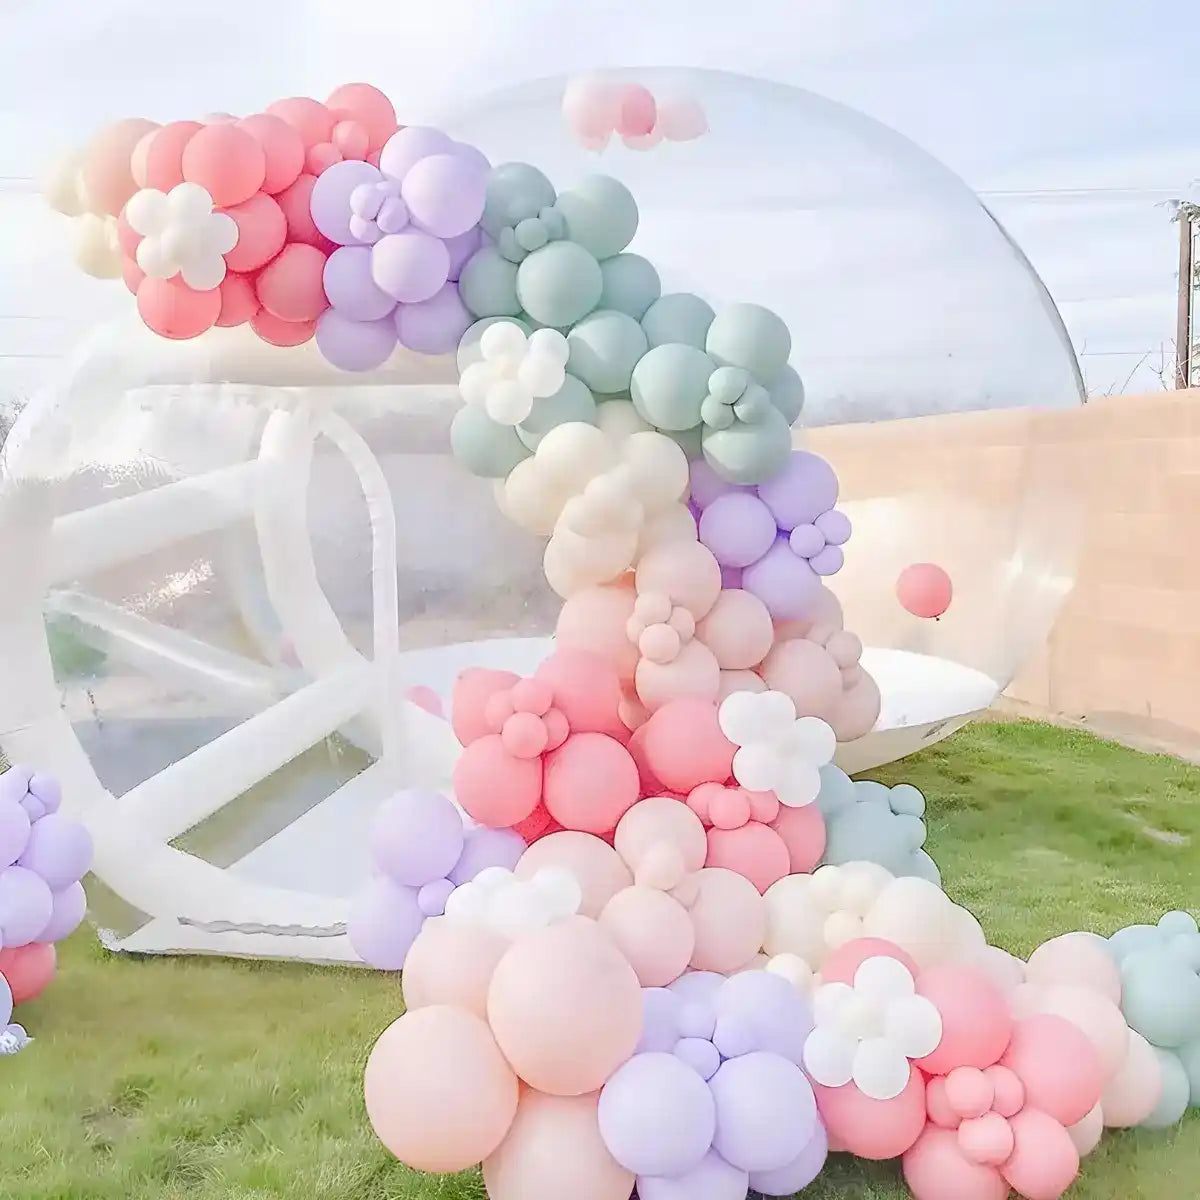 The Bubble House decorated with colorful balloons in backyard